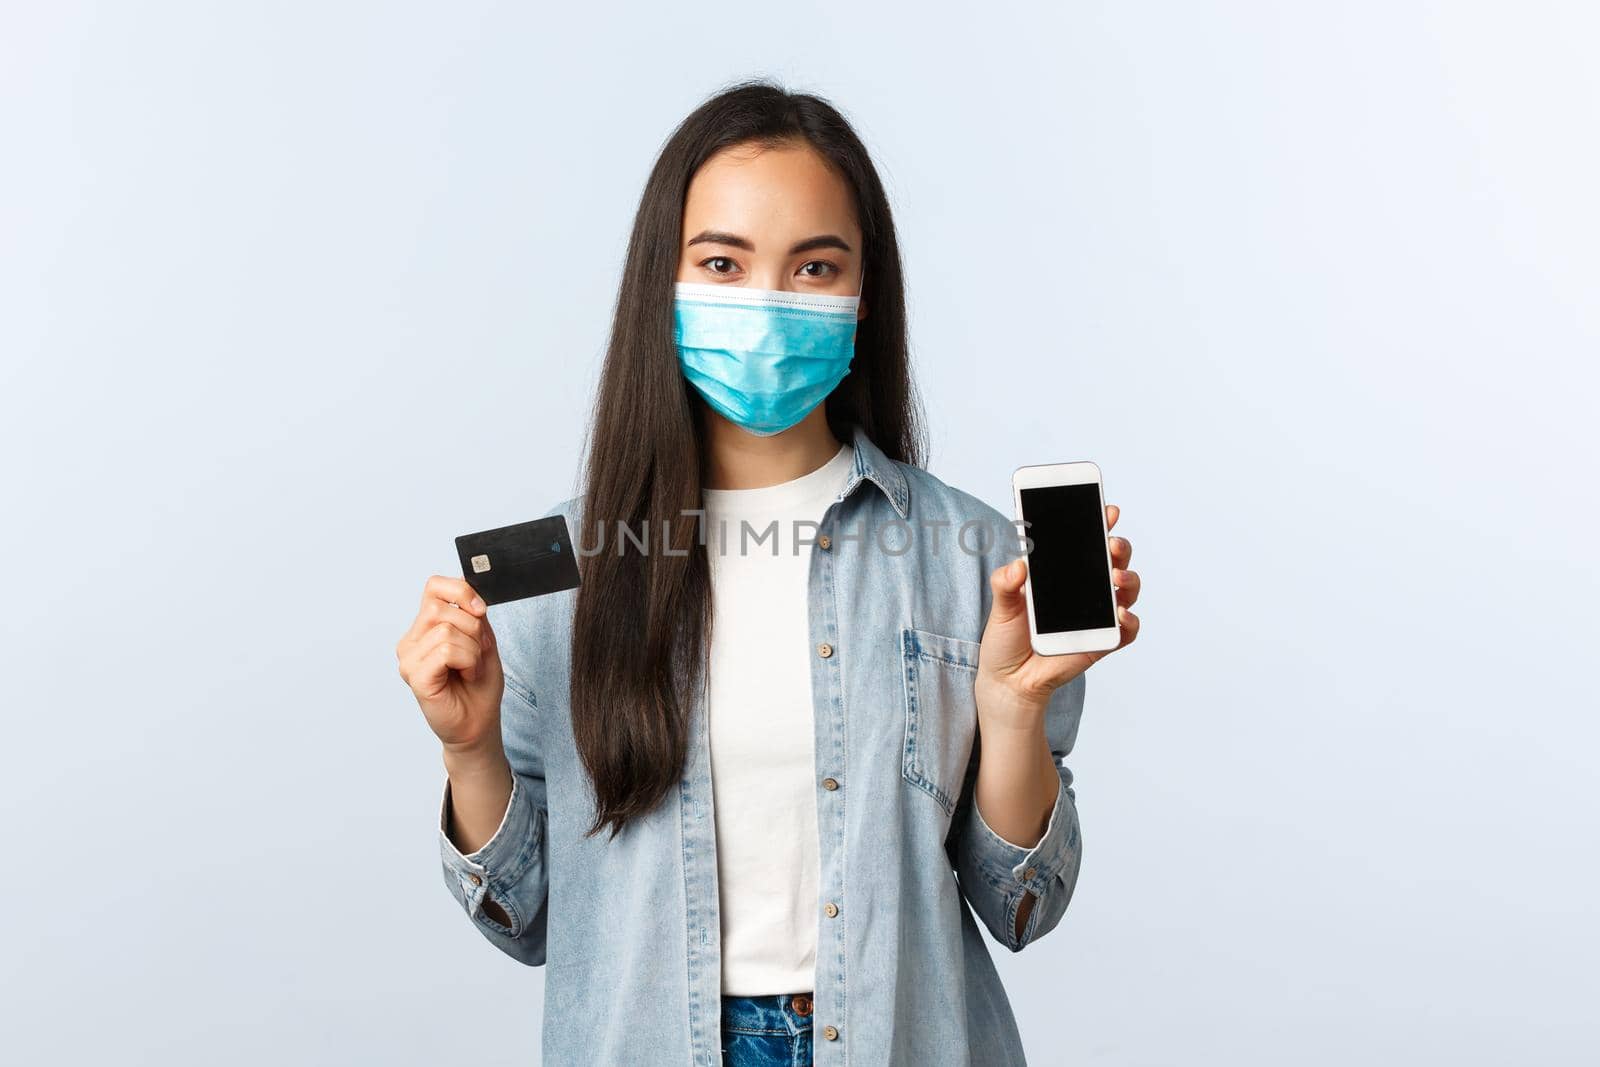 Social distancing lifestyle, covid-19 pandemic and contactless shopping concept. Young pretty asian woman in medical mask showing mobile phone screen and credit card, buying online.